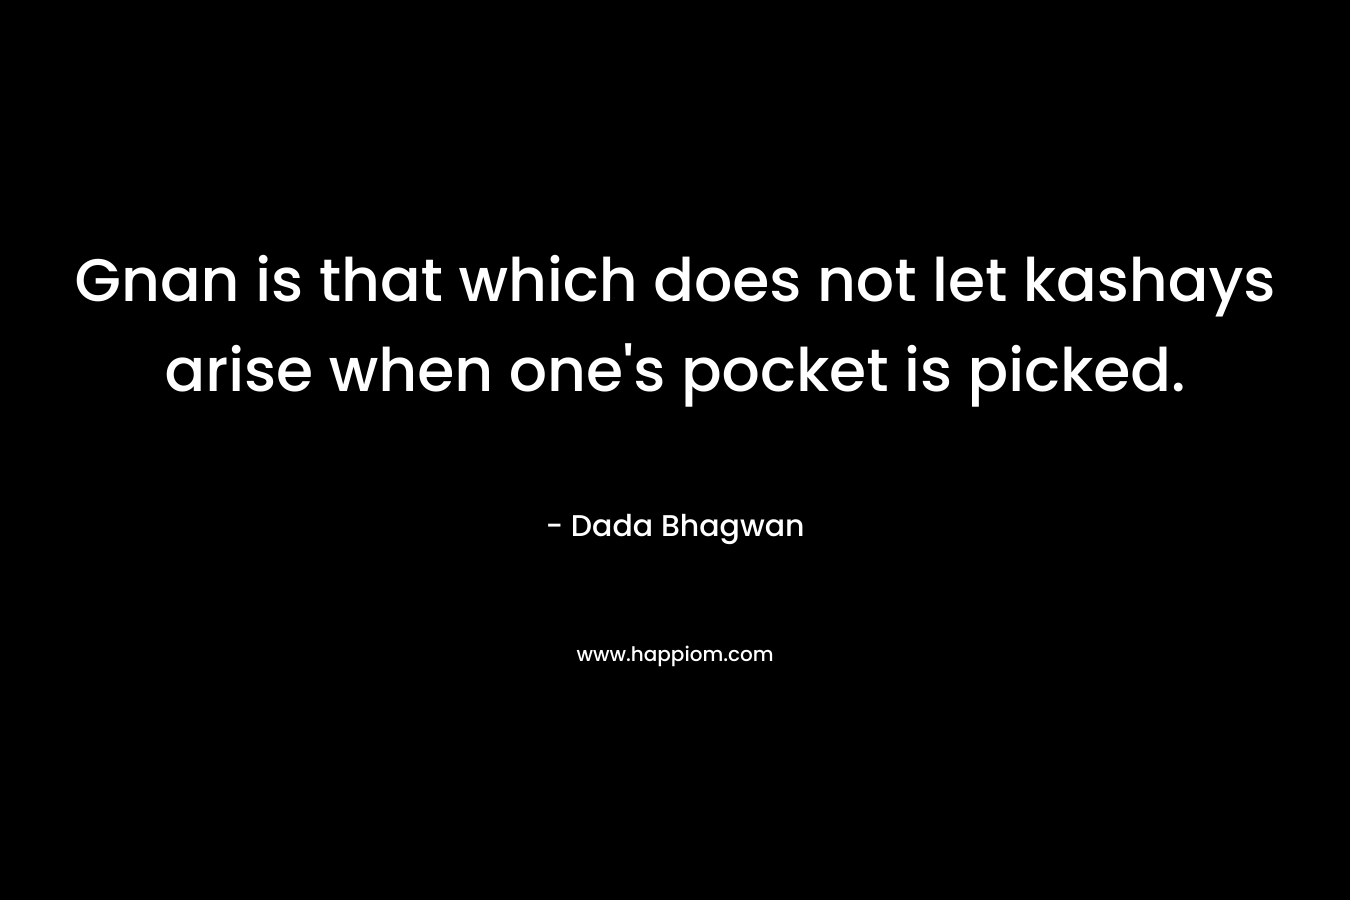 Gnan is that which does not let kashays arise when one’s pocket is picked. – Dada Bhagwan